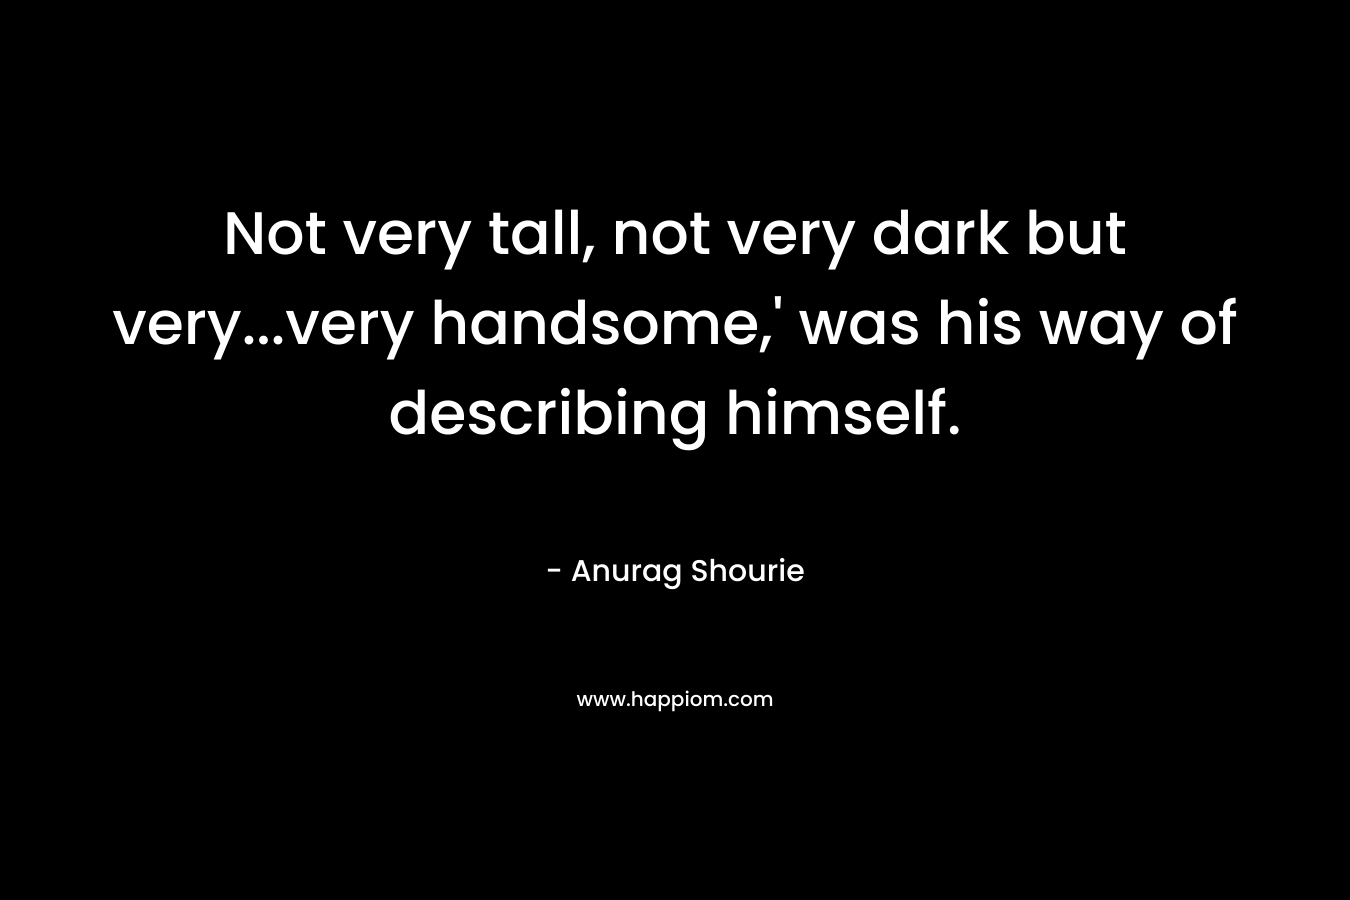 Not very tall, not very dark but very...very handsome,' was his way of describing himself.